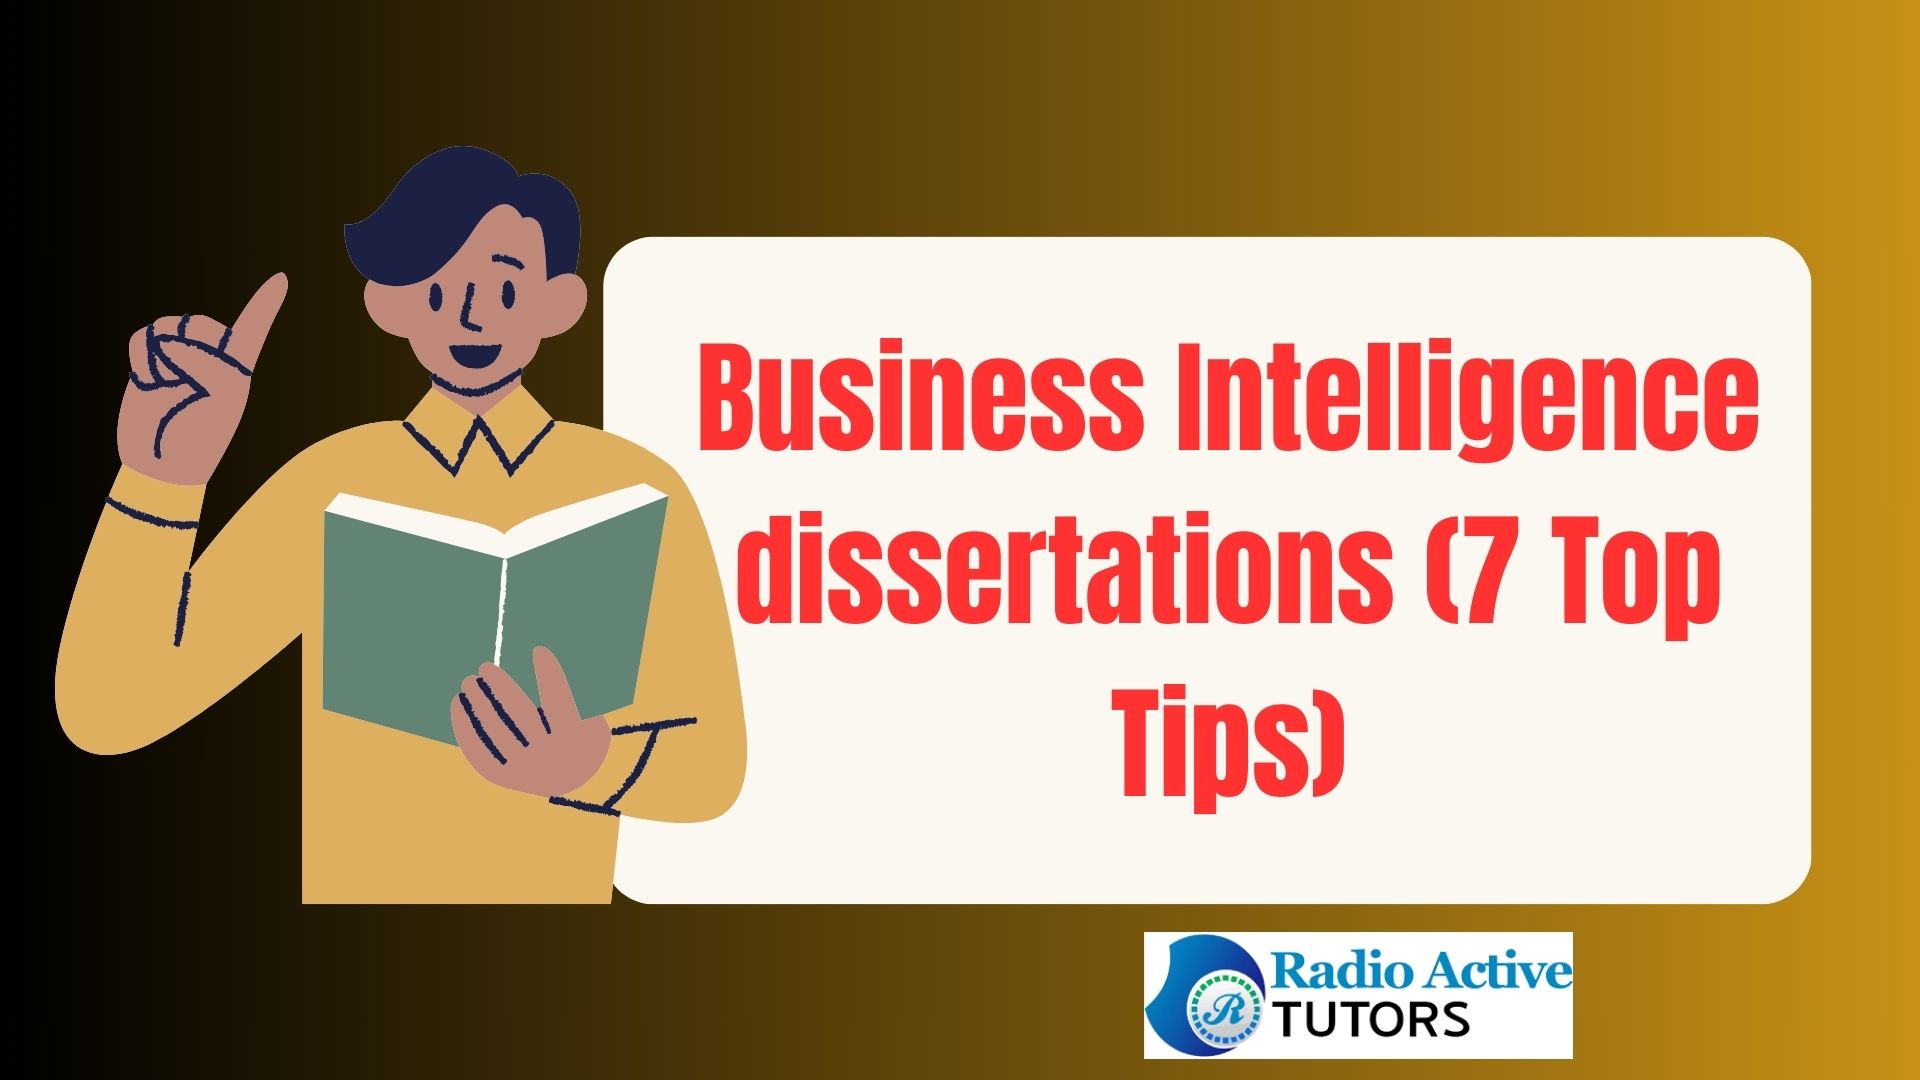 Business Intelligence dissertations (7 Top Tips)